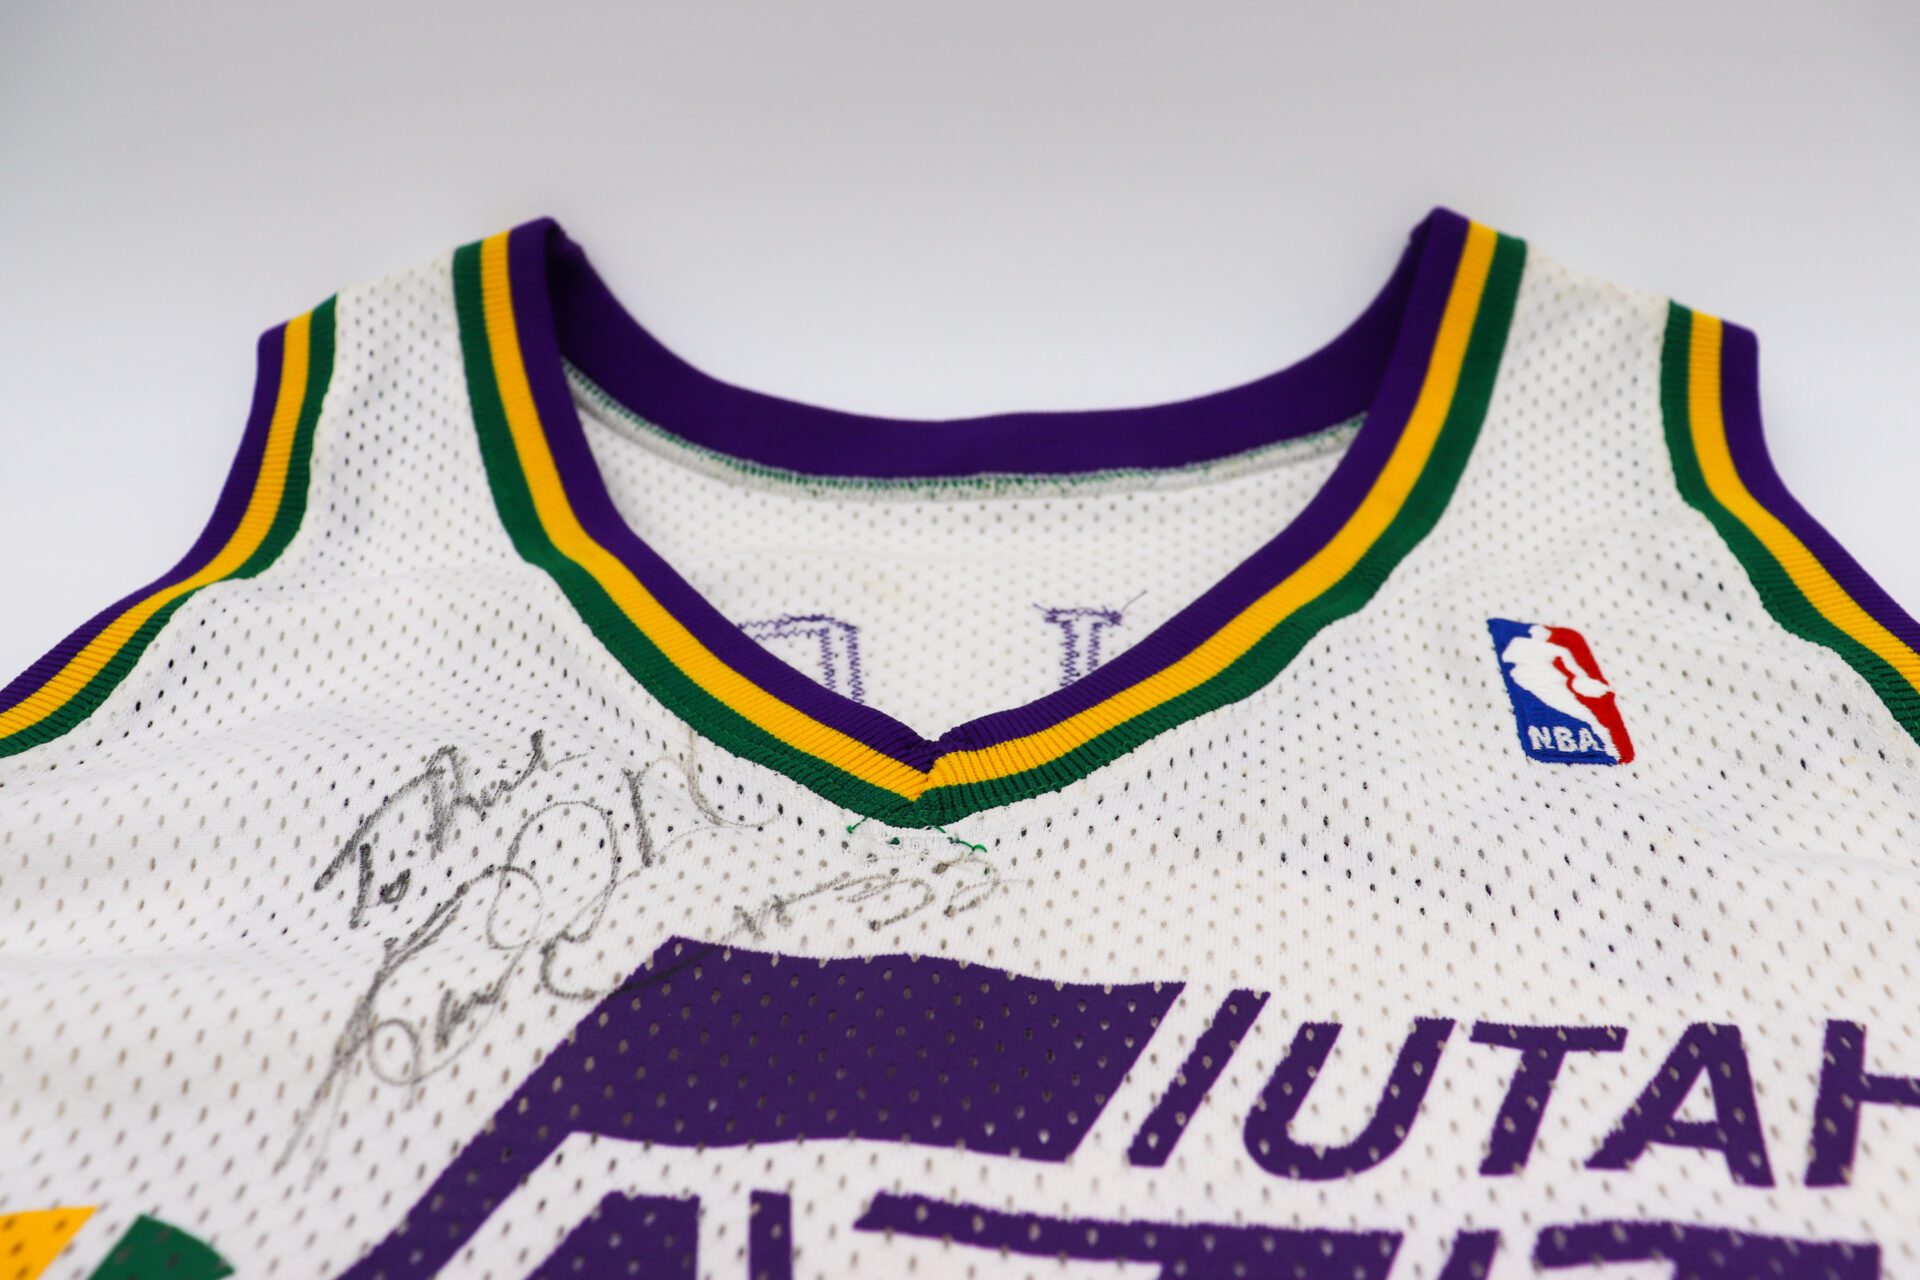 JAZZ KARL MALONE AUTOGRAPHED WHITE AUTHENTIC M&N JERSEY SIZE